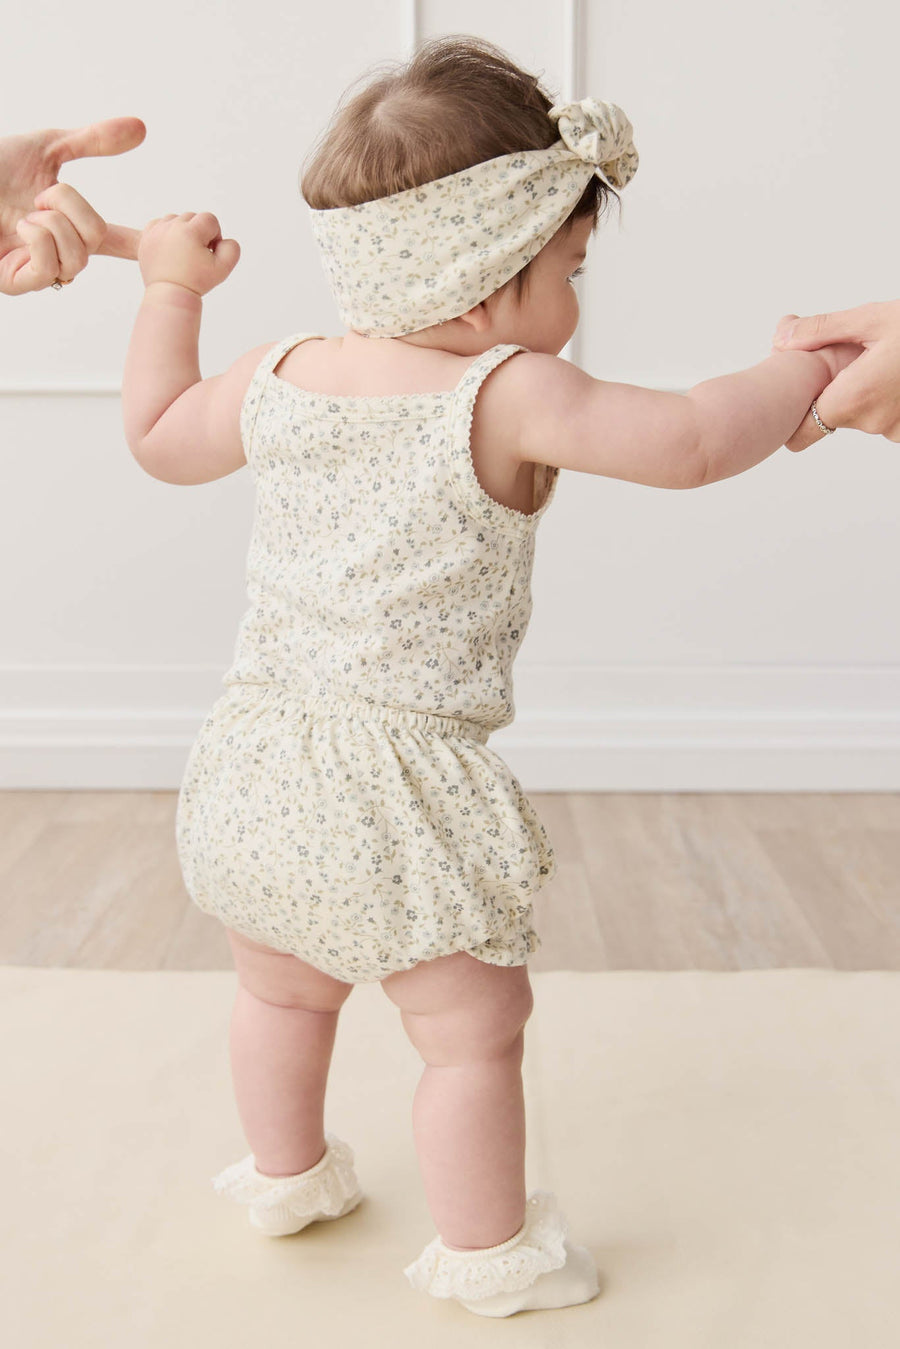 Organic Cotton Frill Bloomer - Dainty Egret Blues Childrens Bloomer from Jamie Kay NZ